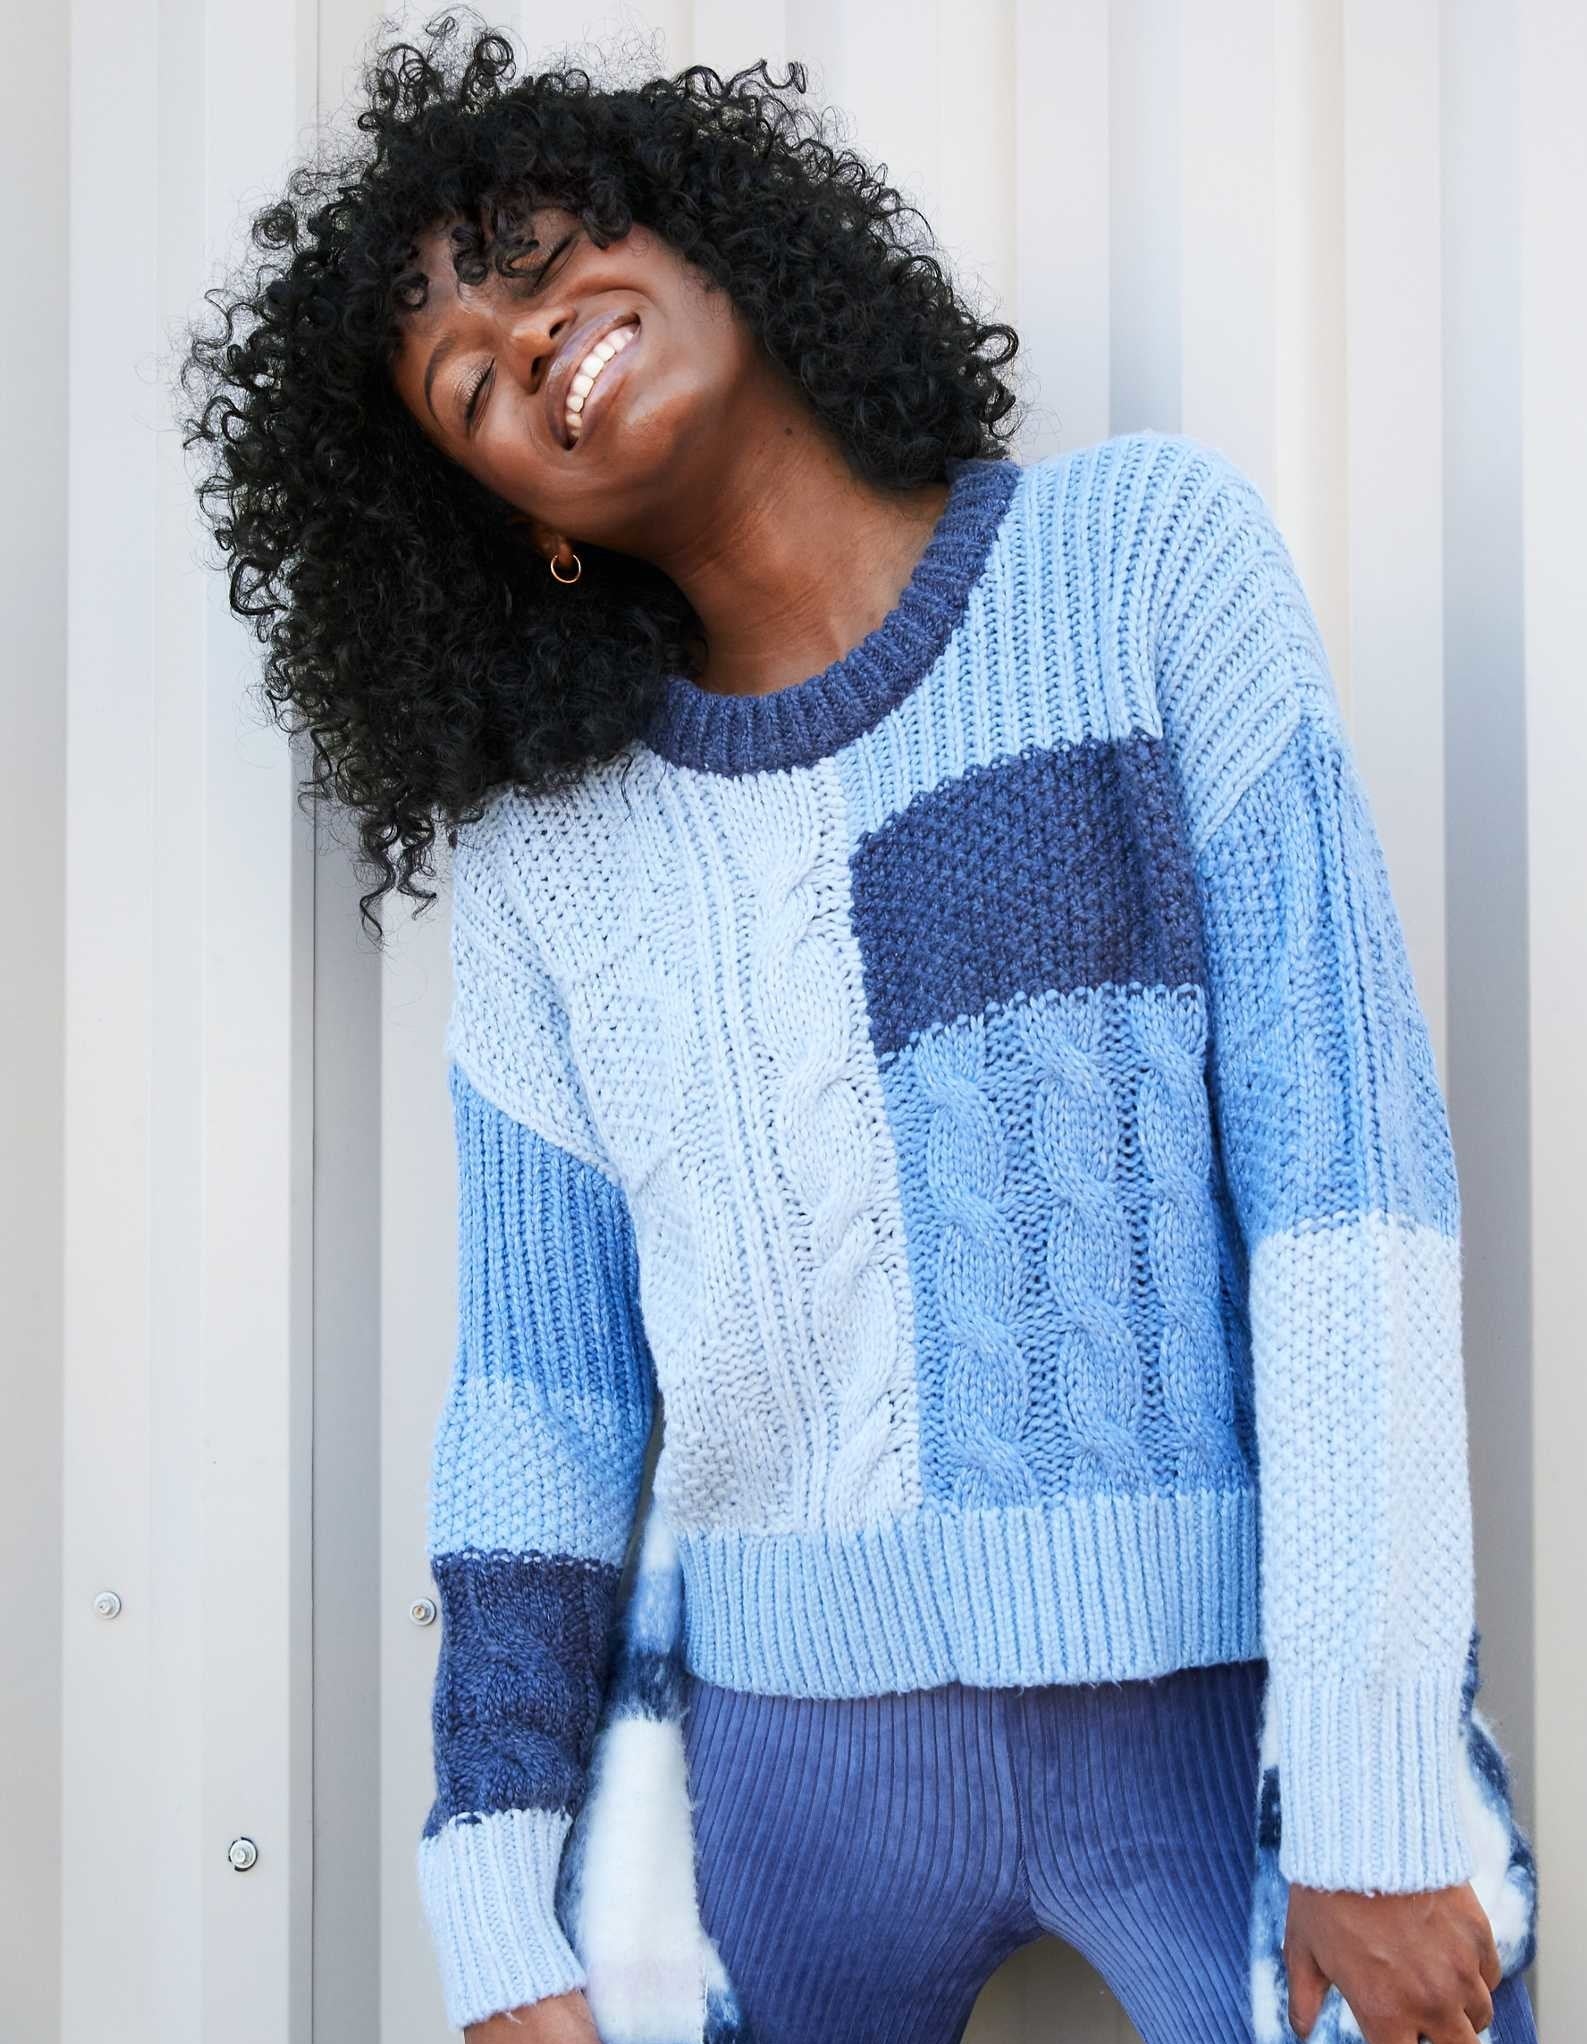 model in monochromatic blue sweater with different panels of ribbing and cabling